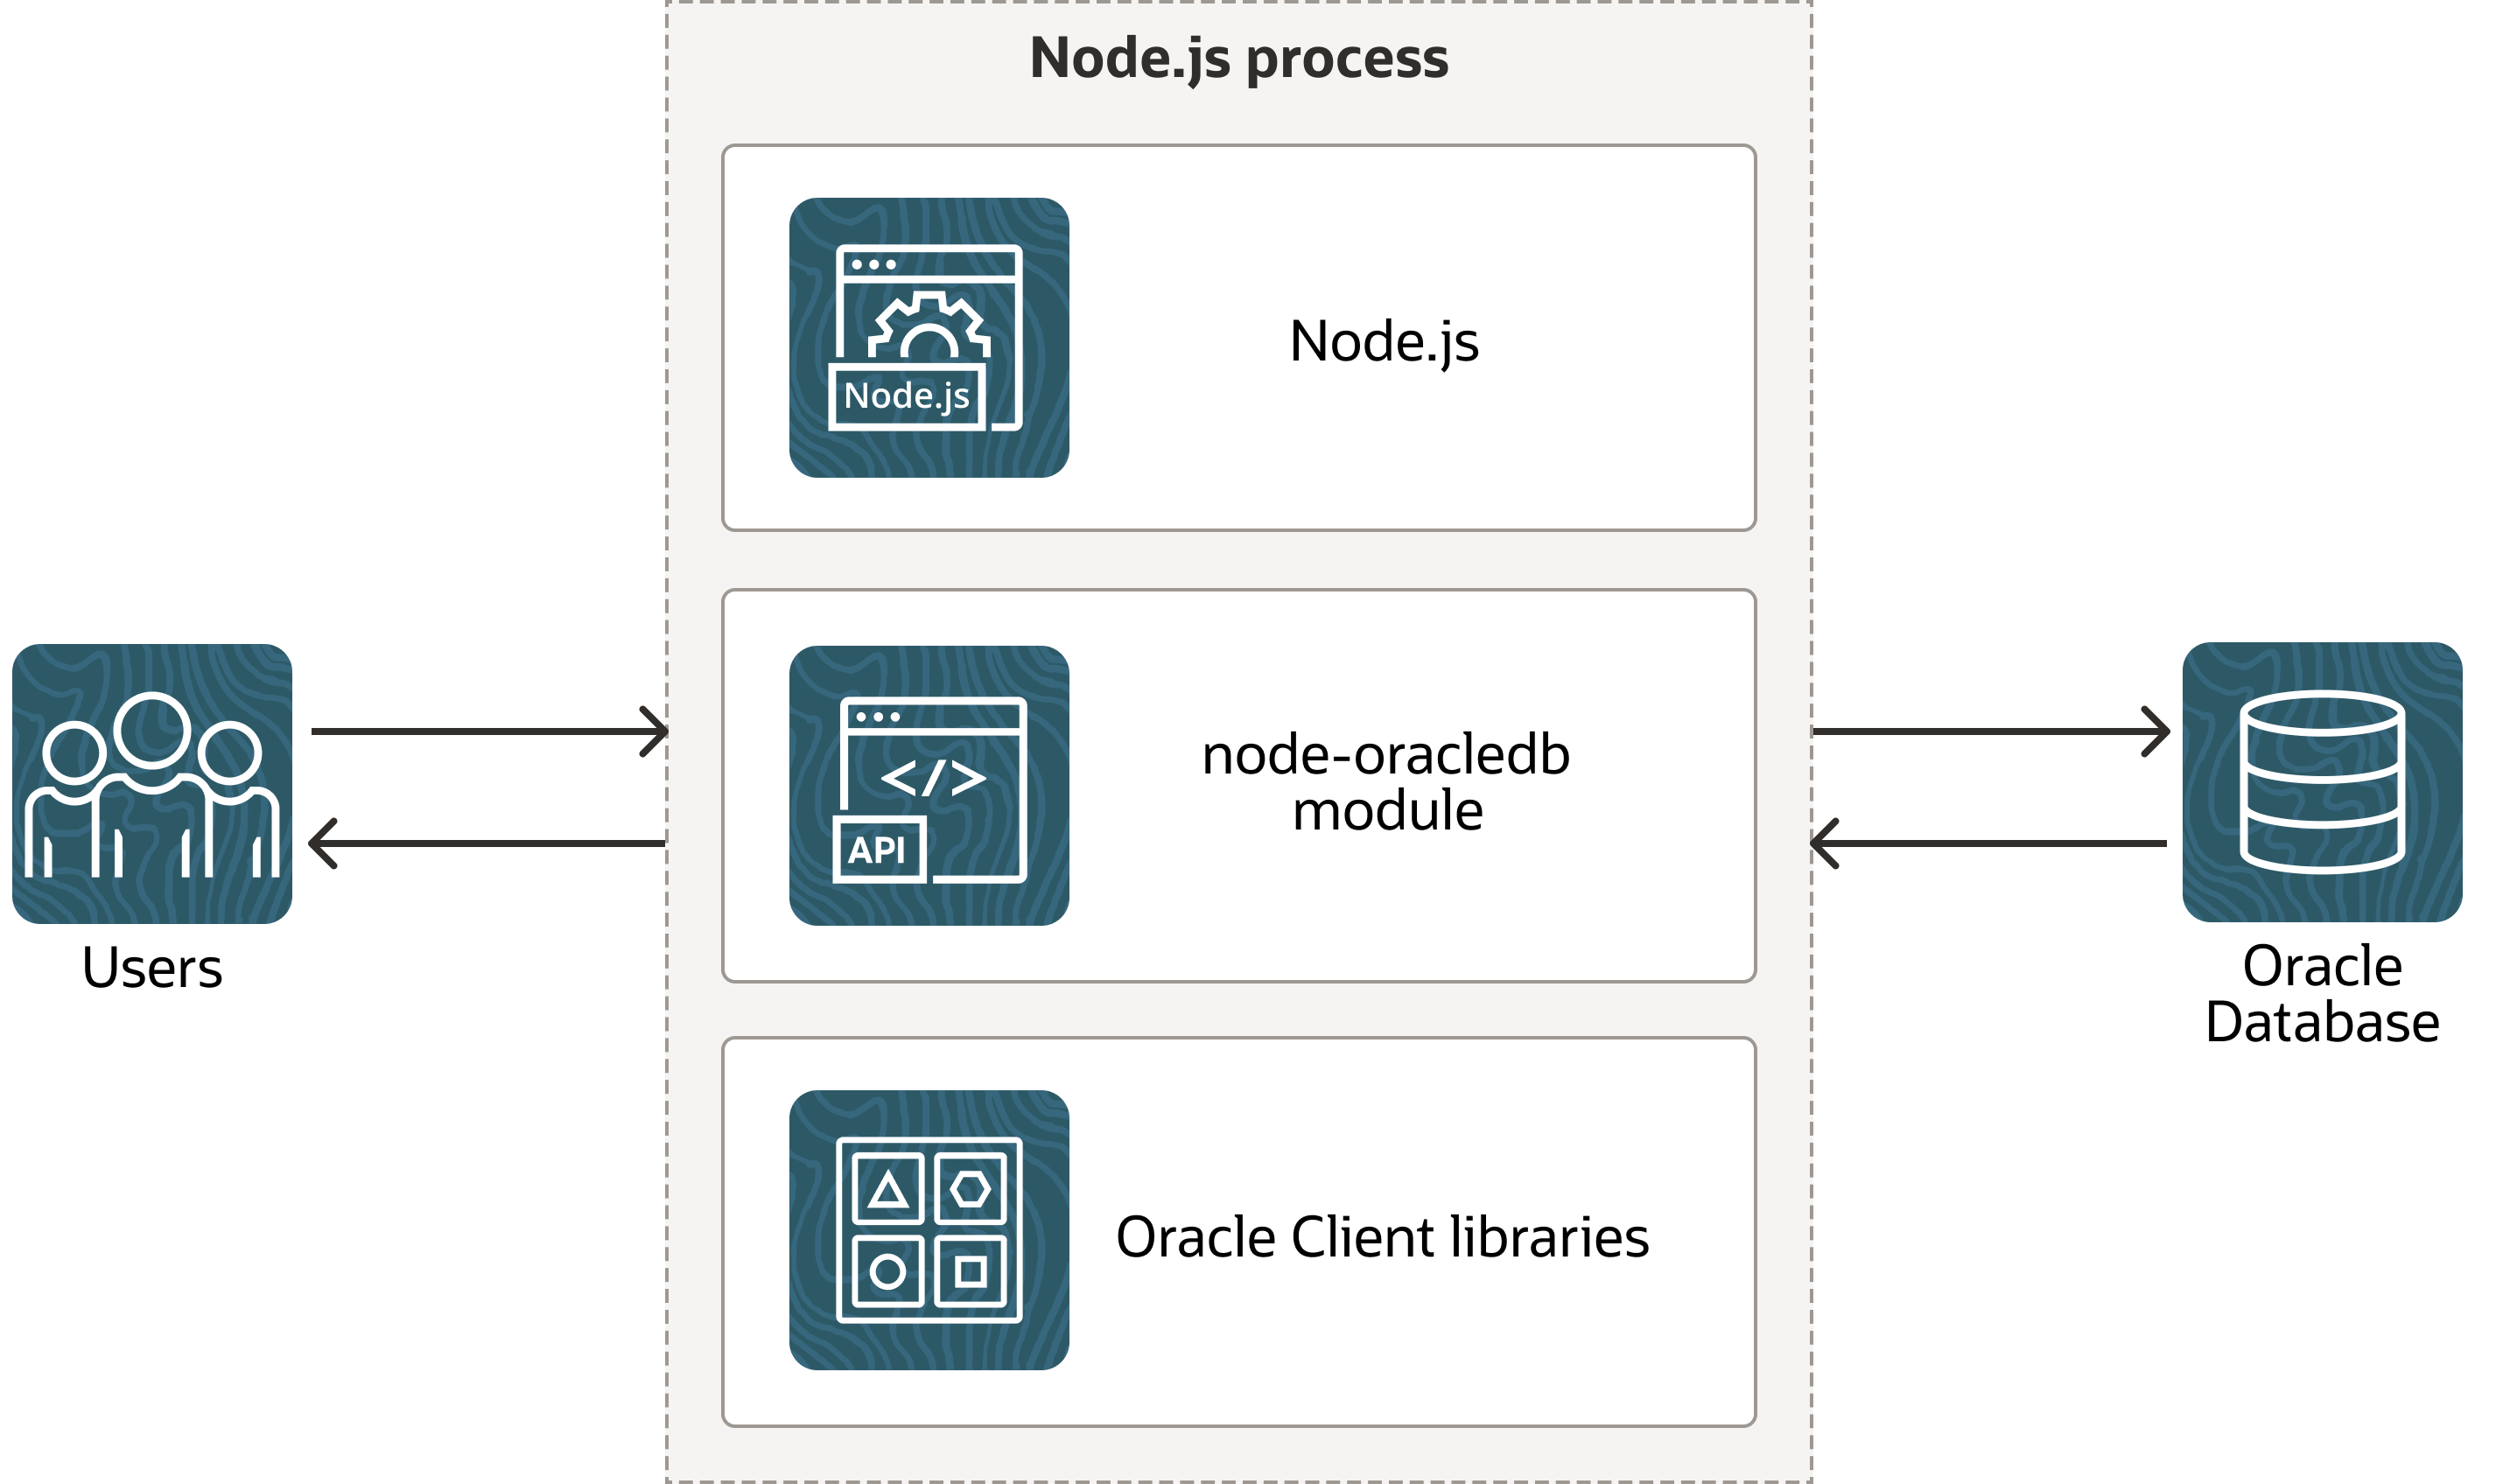 Illustrates the architecture of the node-oracledb driver in Thick mode. At the left is the Users icon. It is connected to a block labeled Node.js process, which contains three smaller blocks labelled Node.js, node-oracledb module, and Oracle Client libraries. The Node.js block connects to the Oracle Database icon. The connection establishment sequence is described in the following text.